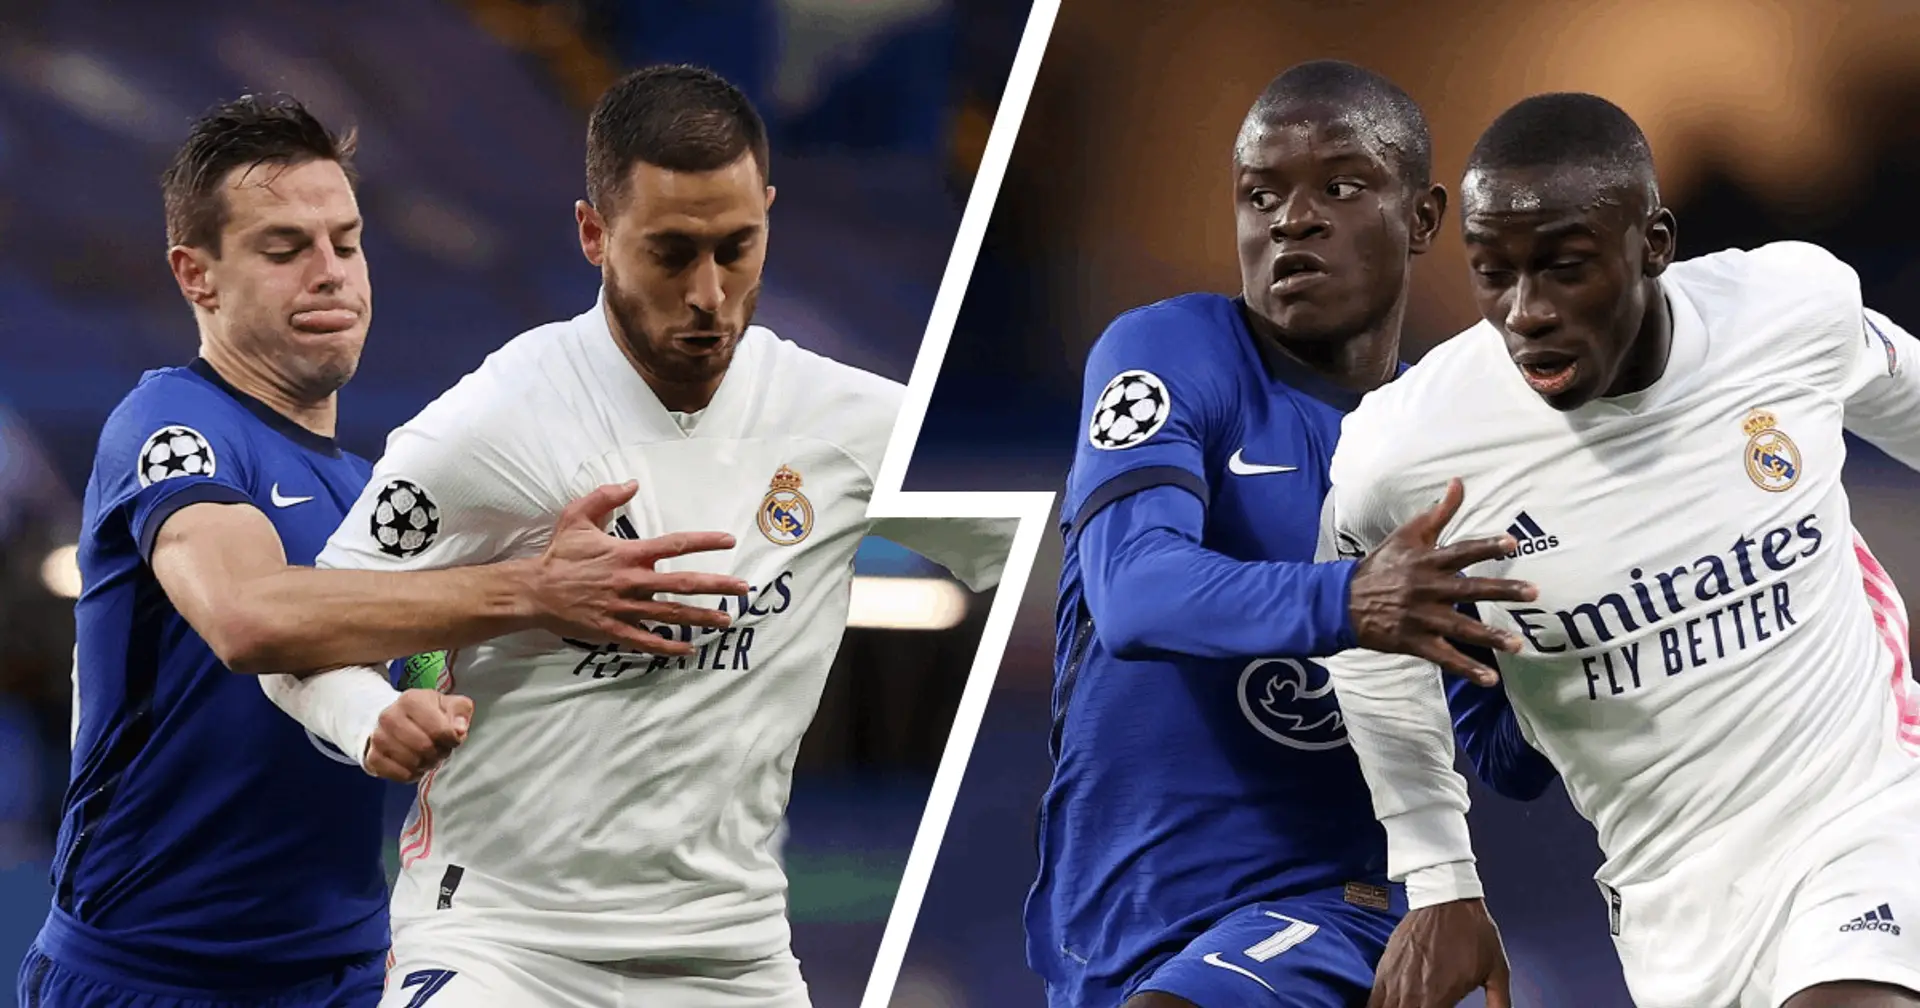 Courtois - 7.5, Vinicius - 4: rating Real Madrid players in Chelsea loss